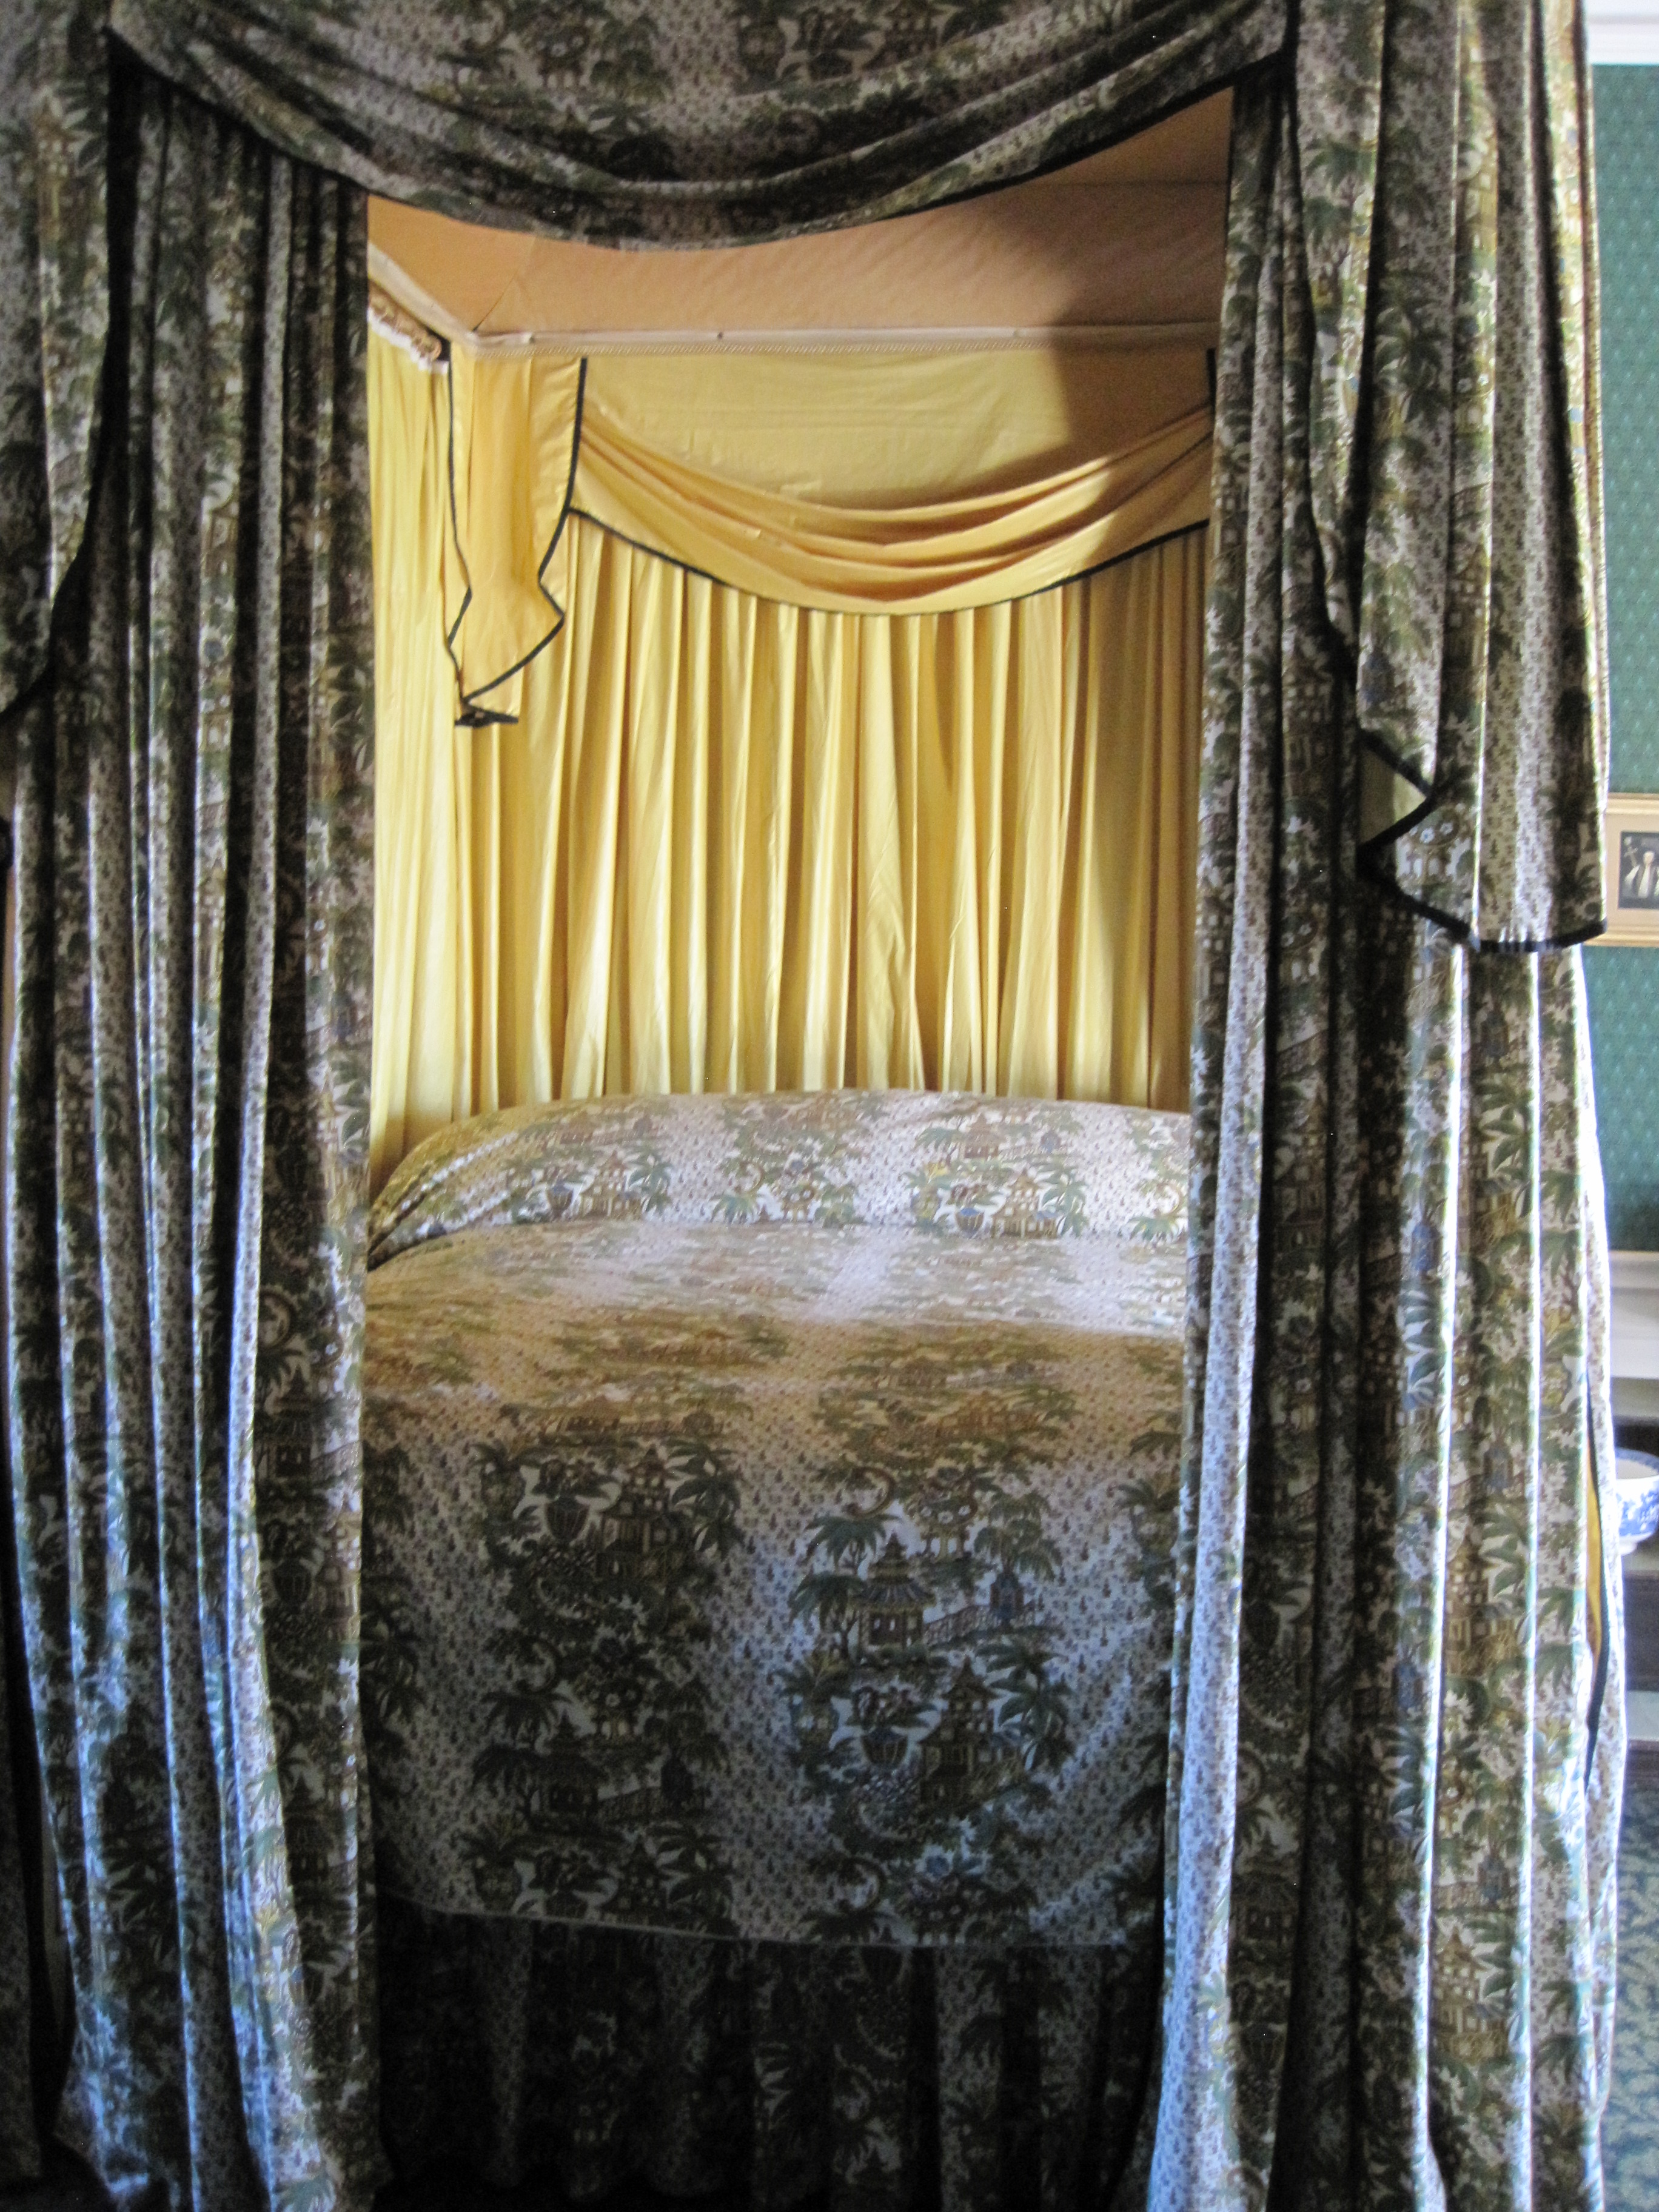 Lord Byron's bed at Newstead Abbey - photo by Juliamaud